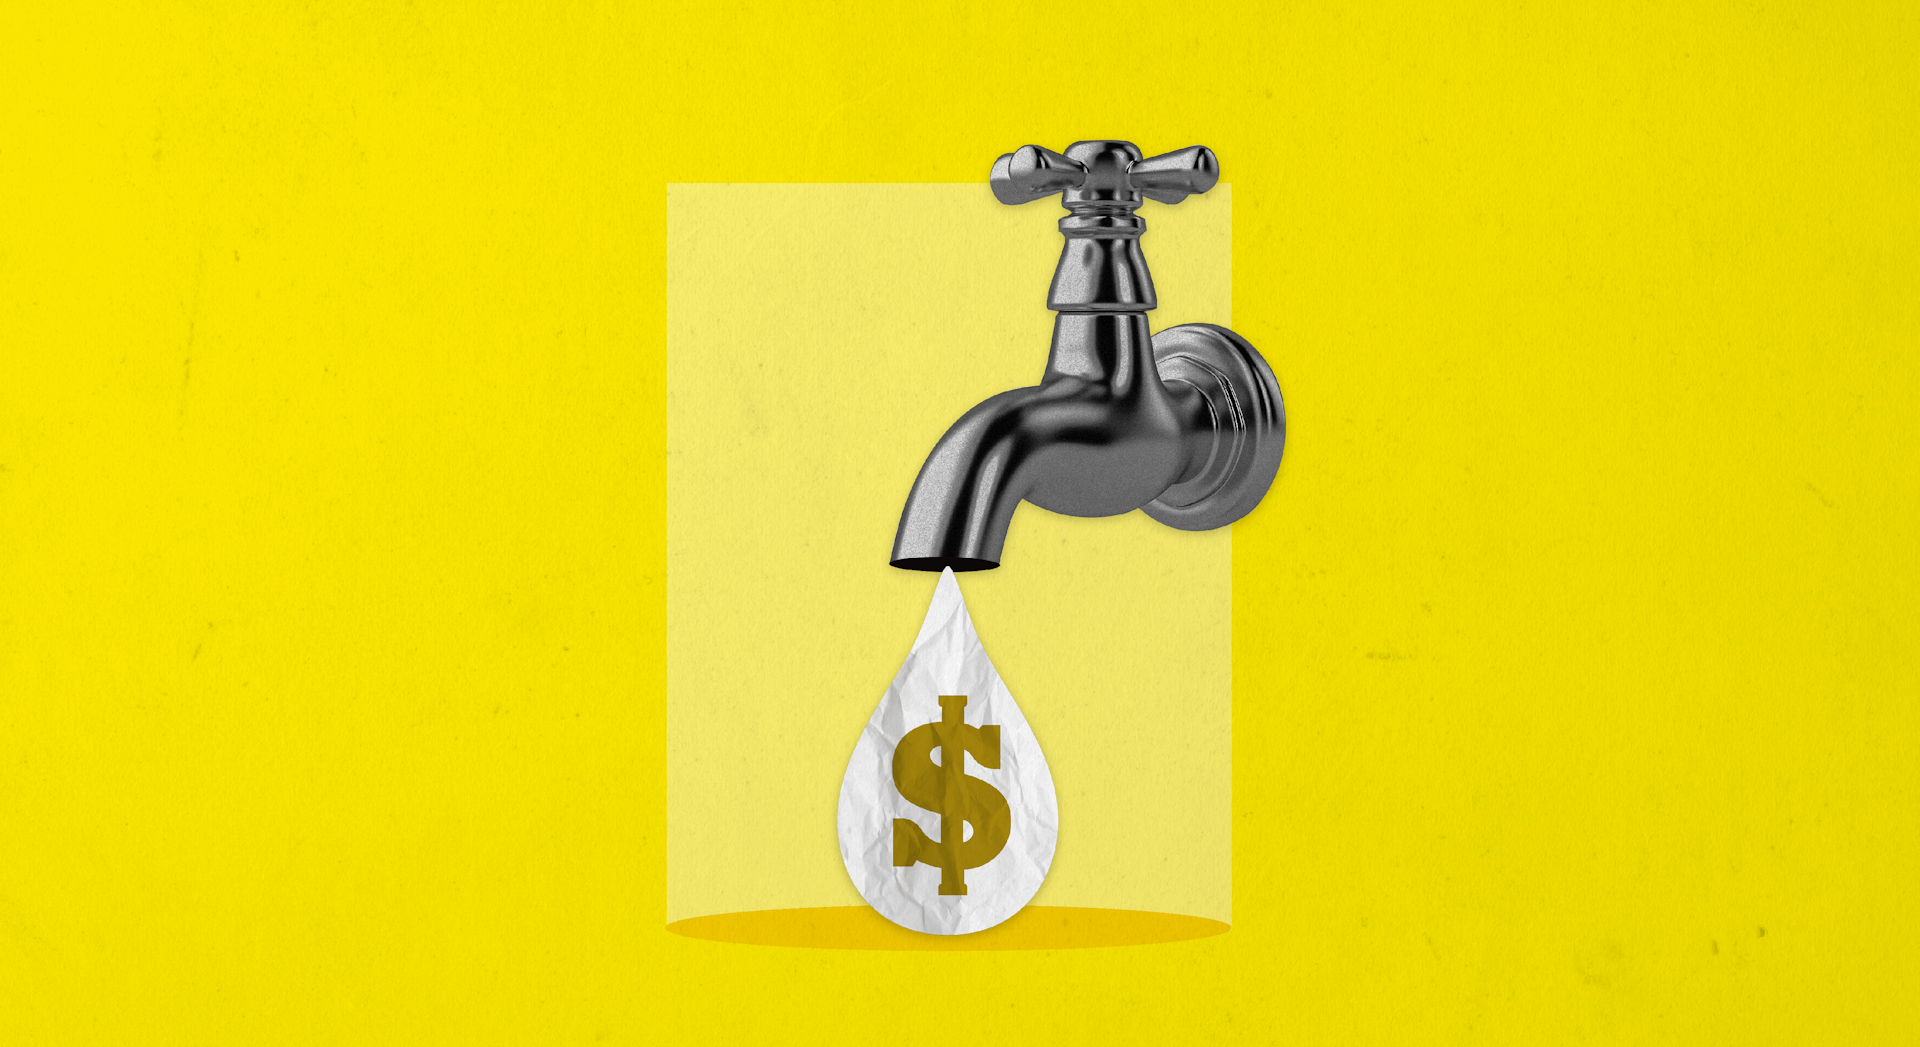 A collage of a silver tap on a yellow background. A white water drip emerges from the tap with a dollar sign on.